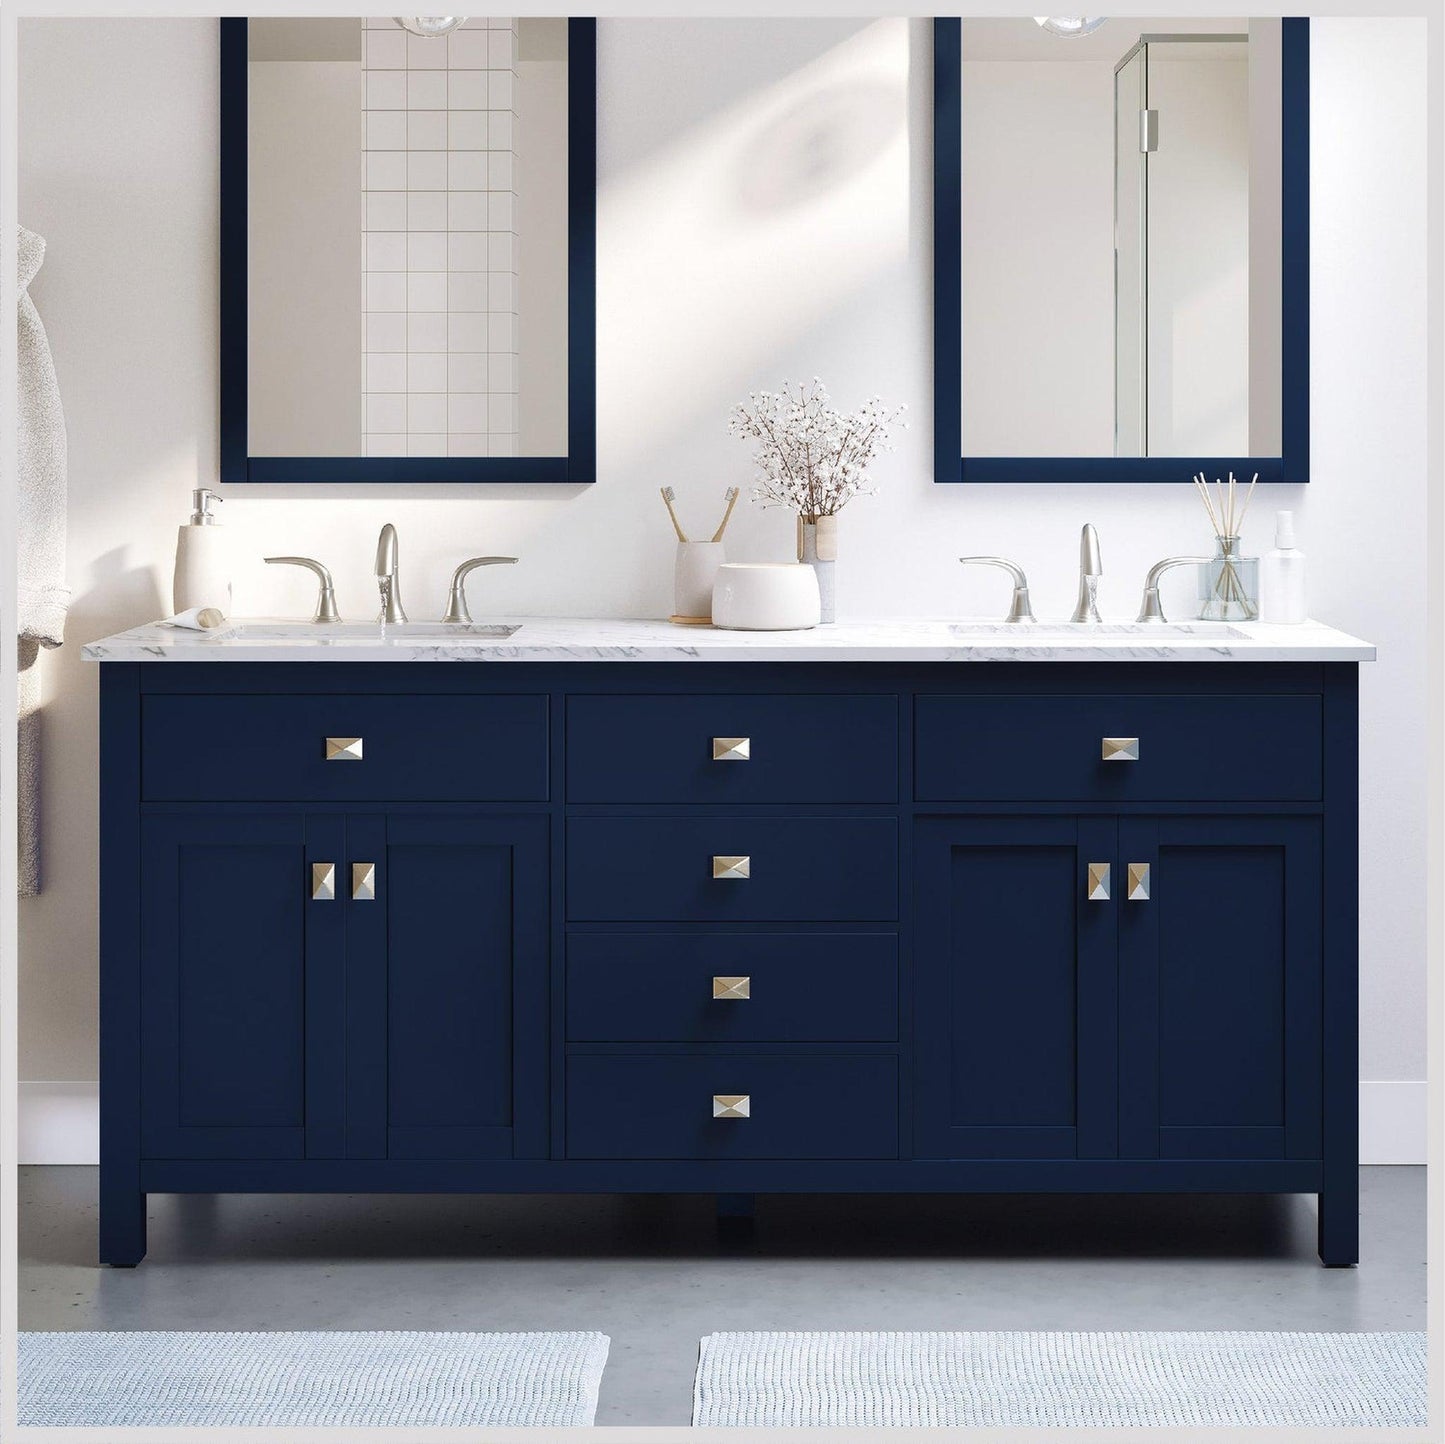 Eviva Totti Artemis 60" x 34" Blue Freestanding Bathroom Vanity With Carrara Style Man-made Stone Countertop and Double Undermount Sink